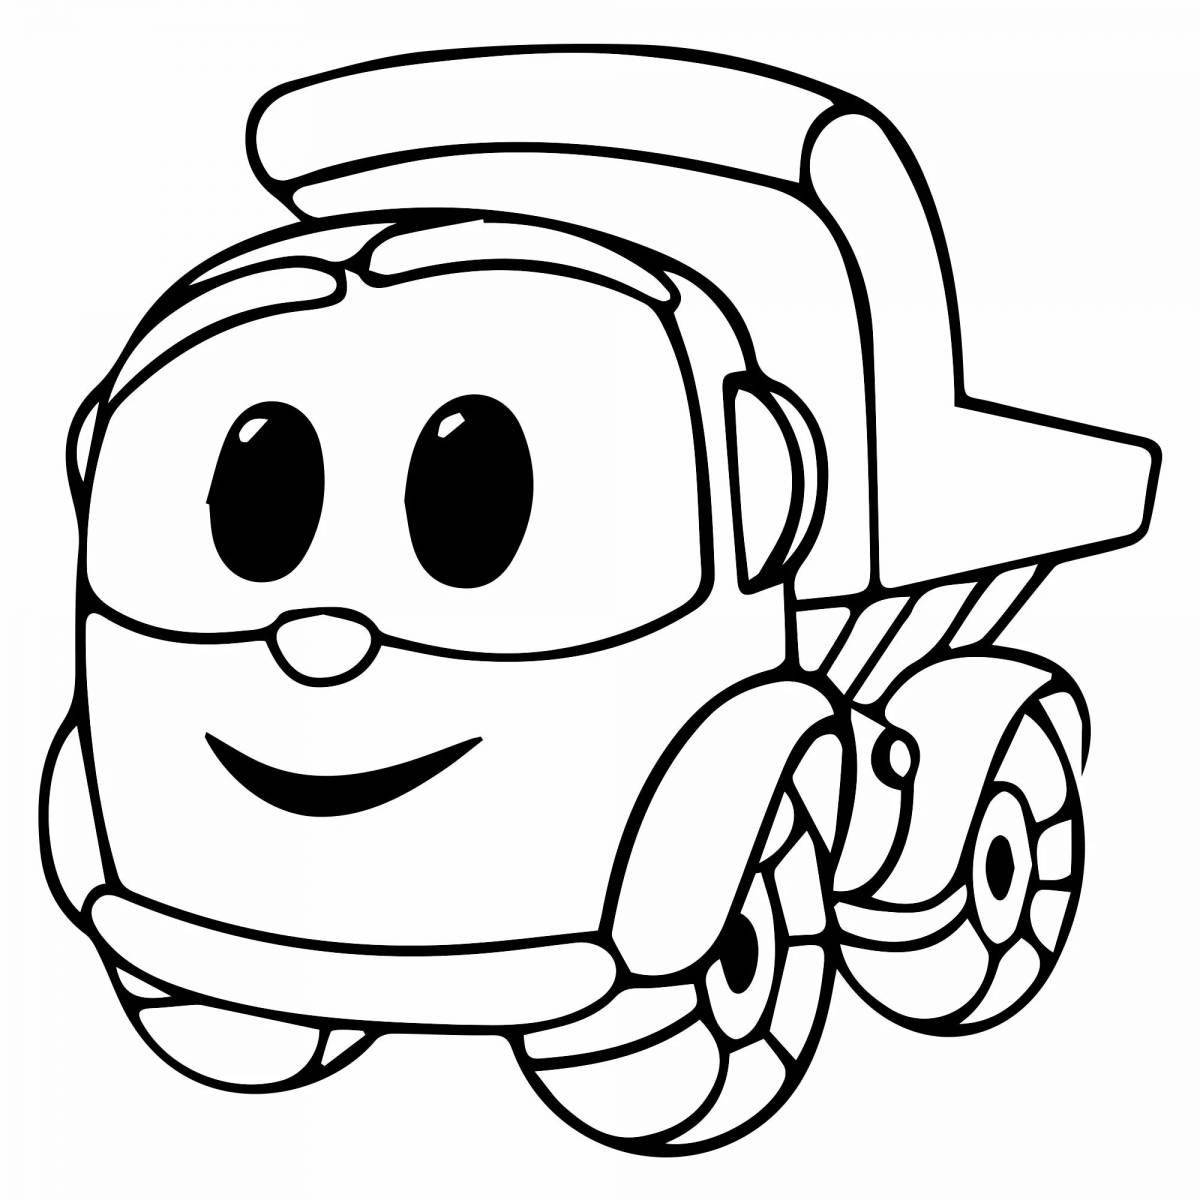 Splendid lev truck coloring page